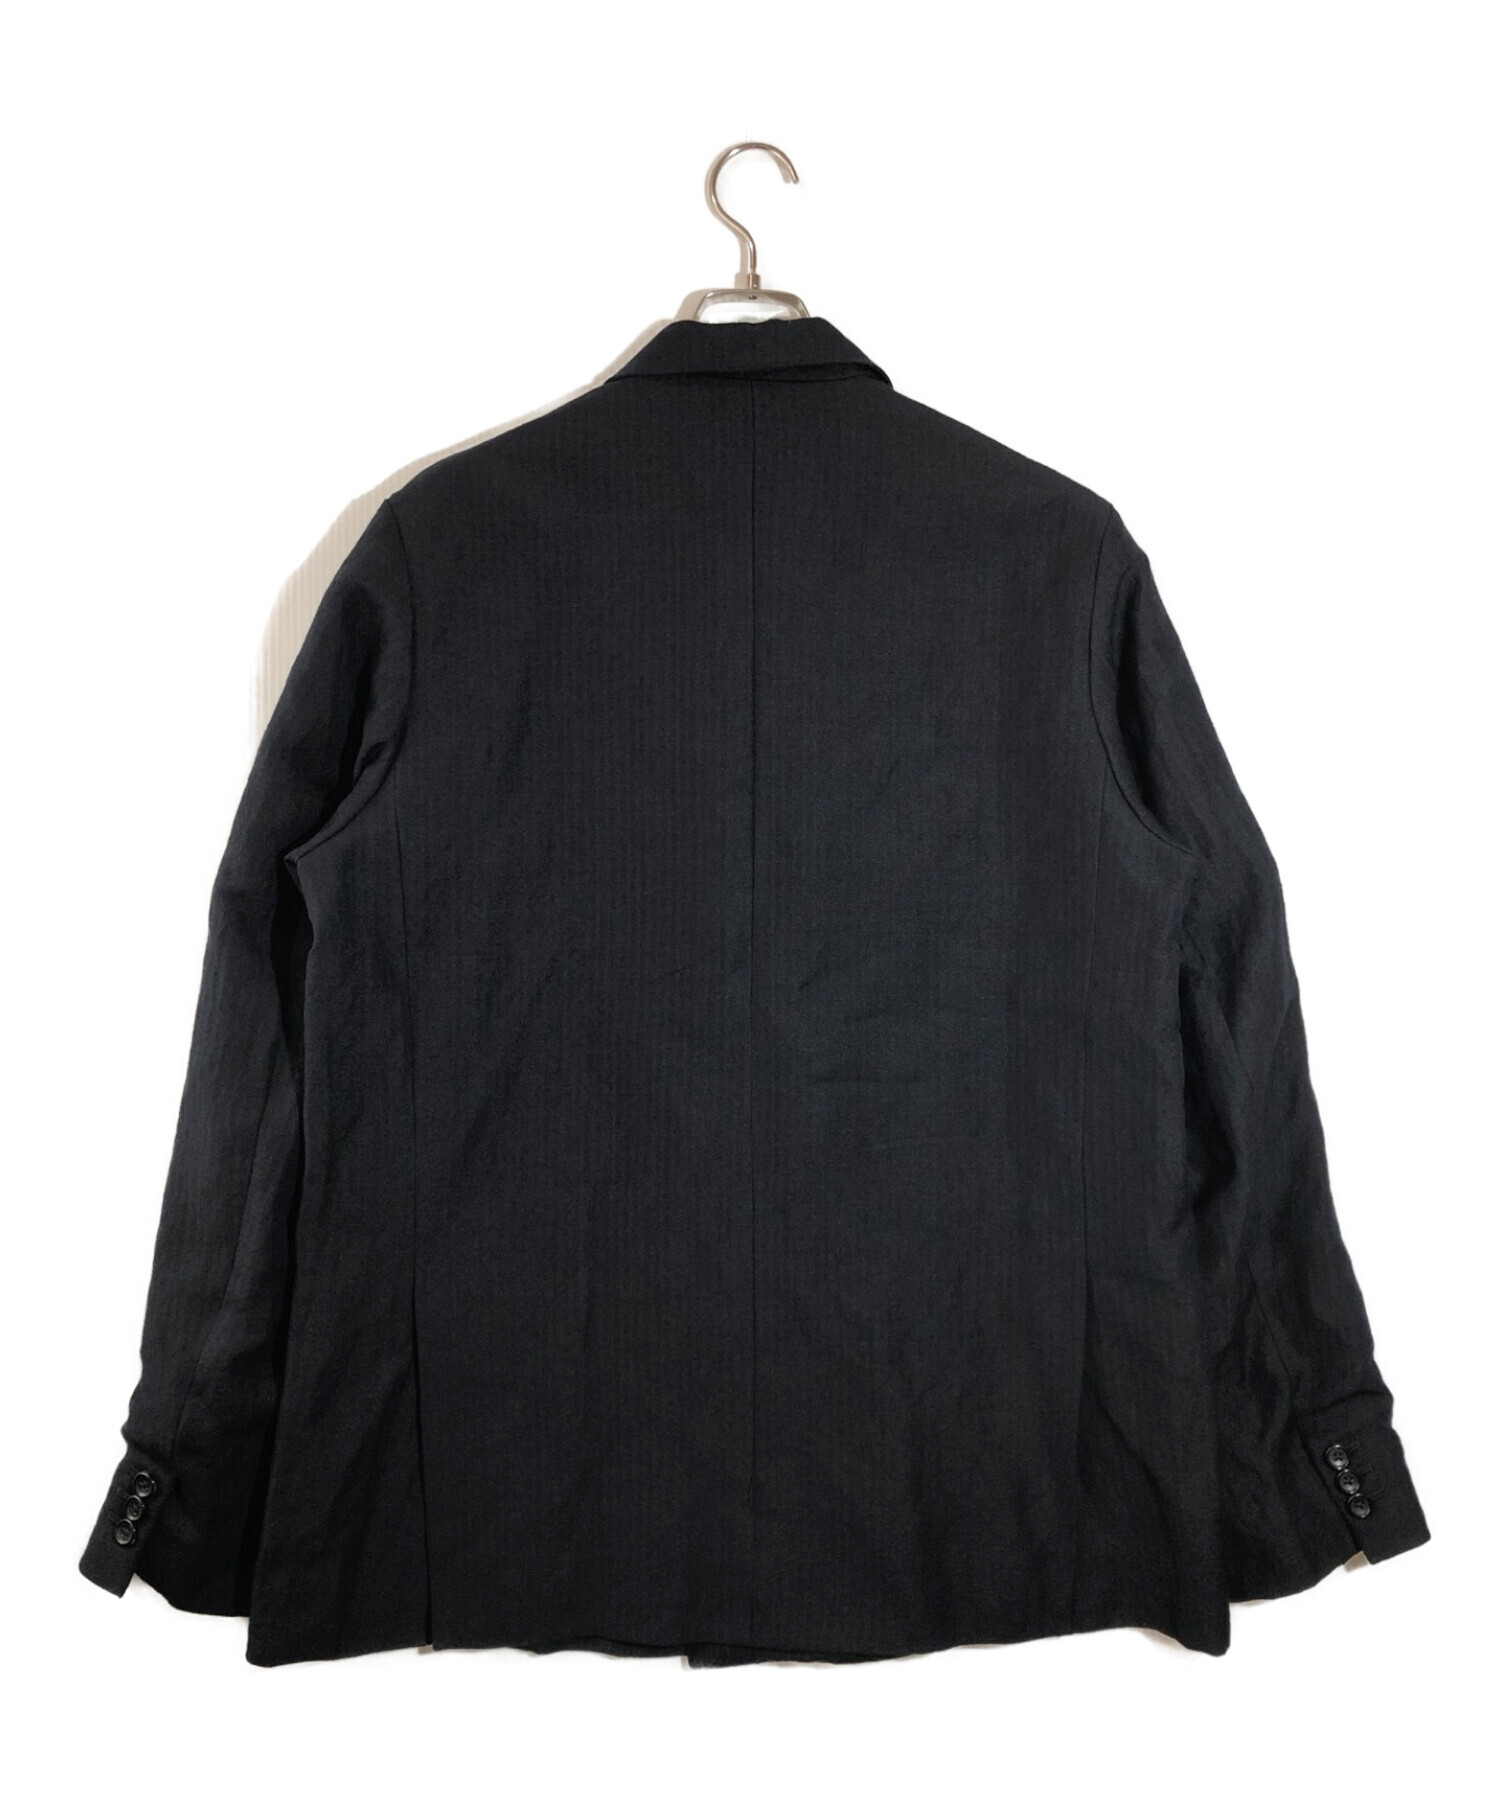 A.PRESSE Double Breasted Jacket 3 NAVY - テーラードジャケット